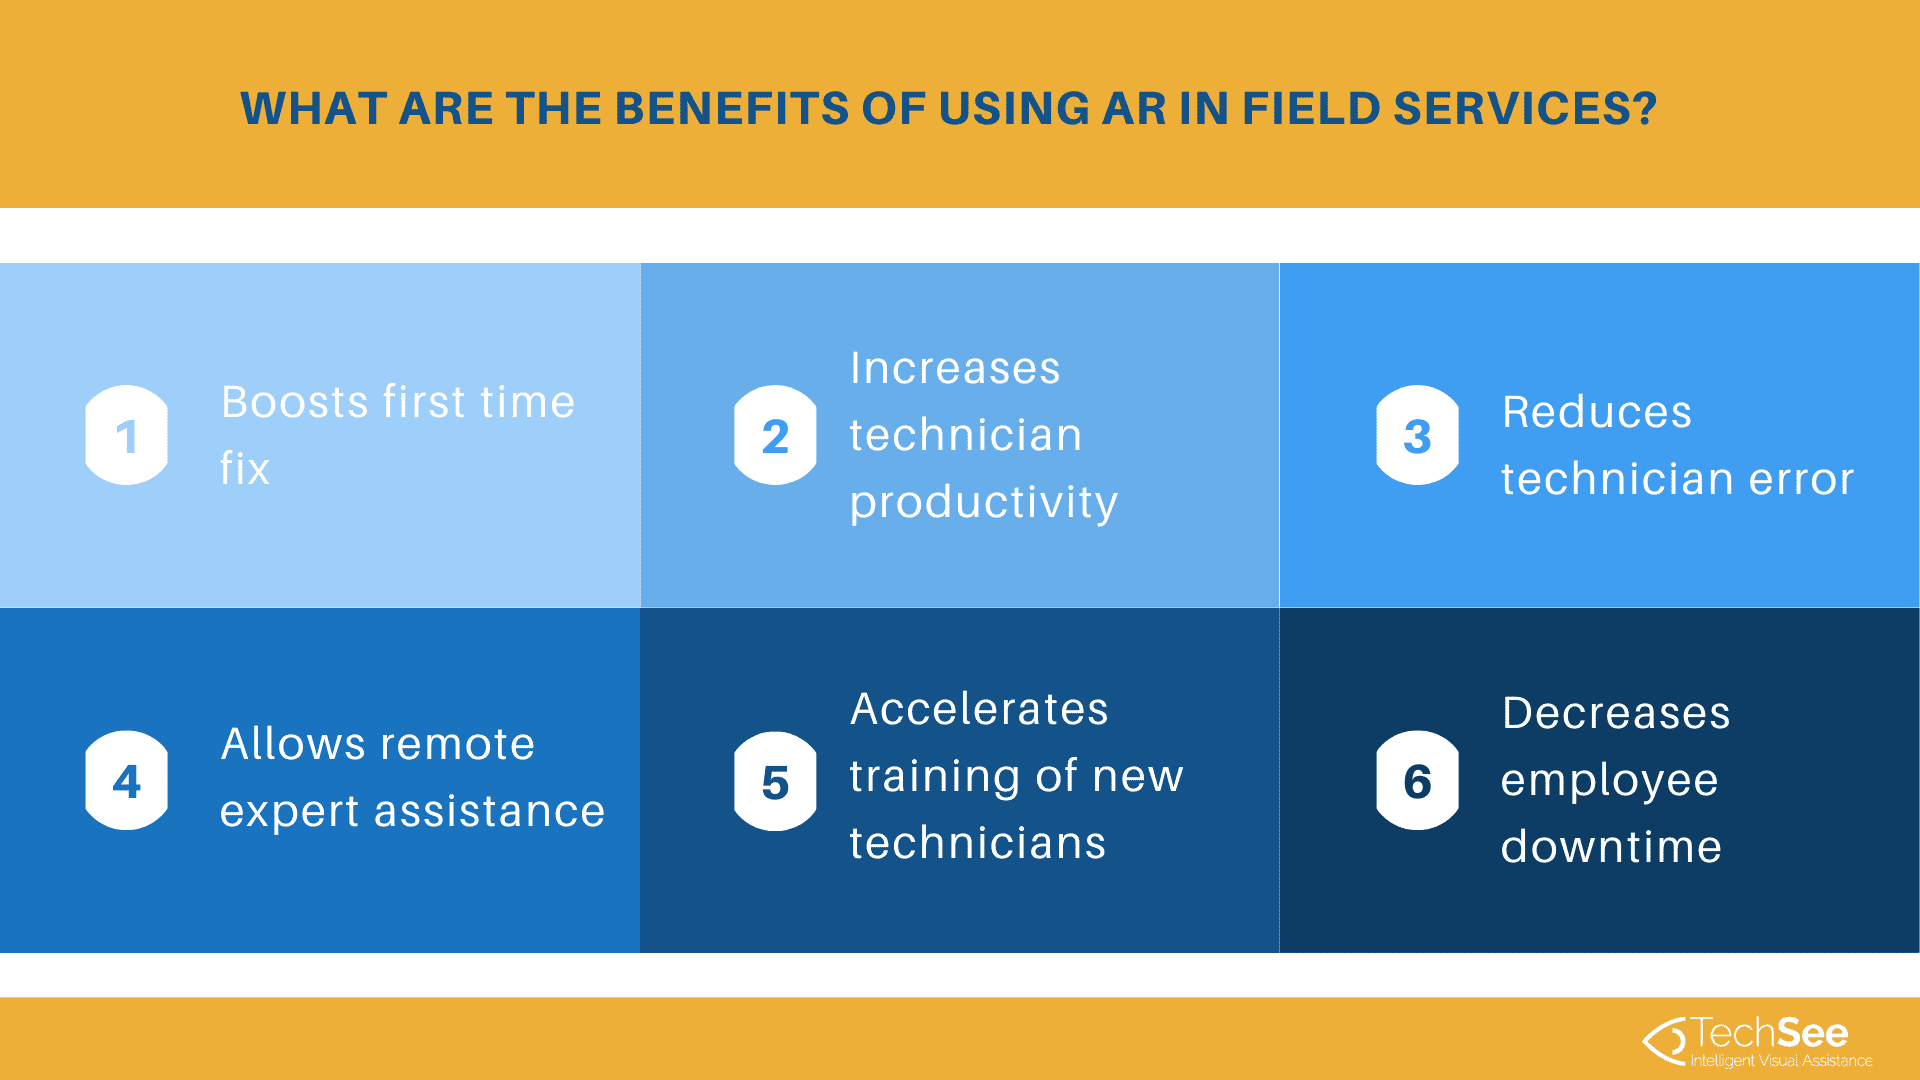 TechSee explains the benefits of implementing AR in field services.